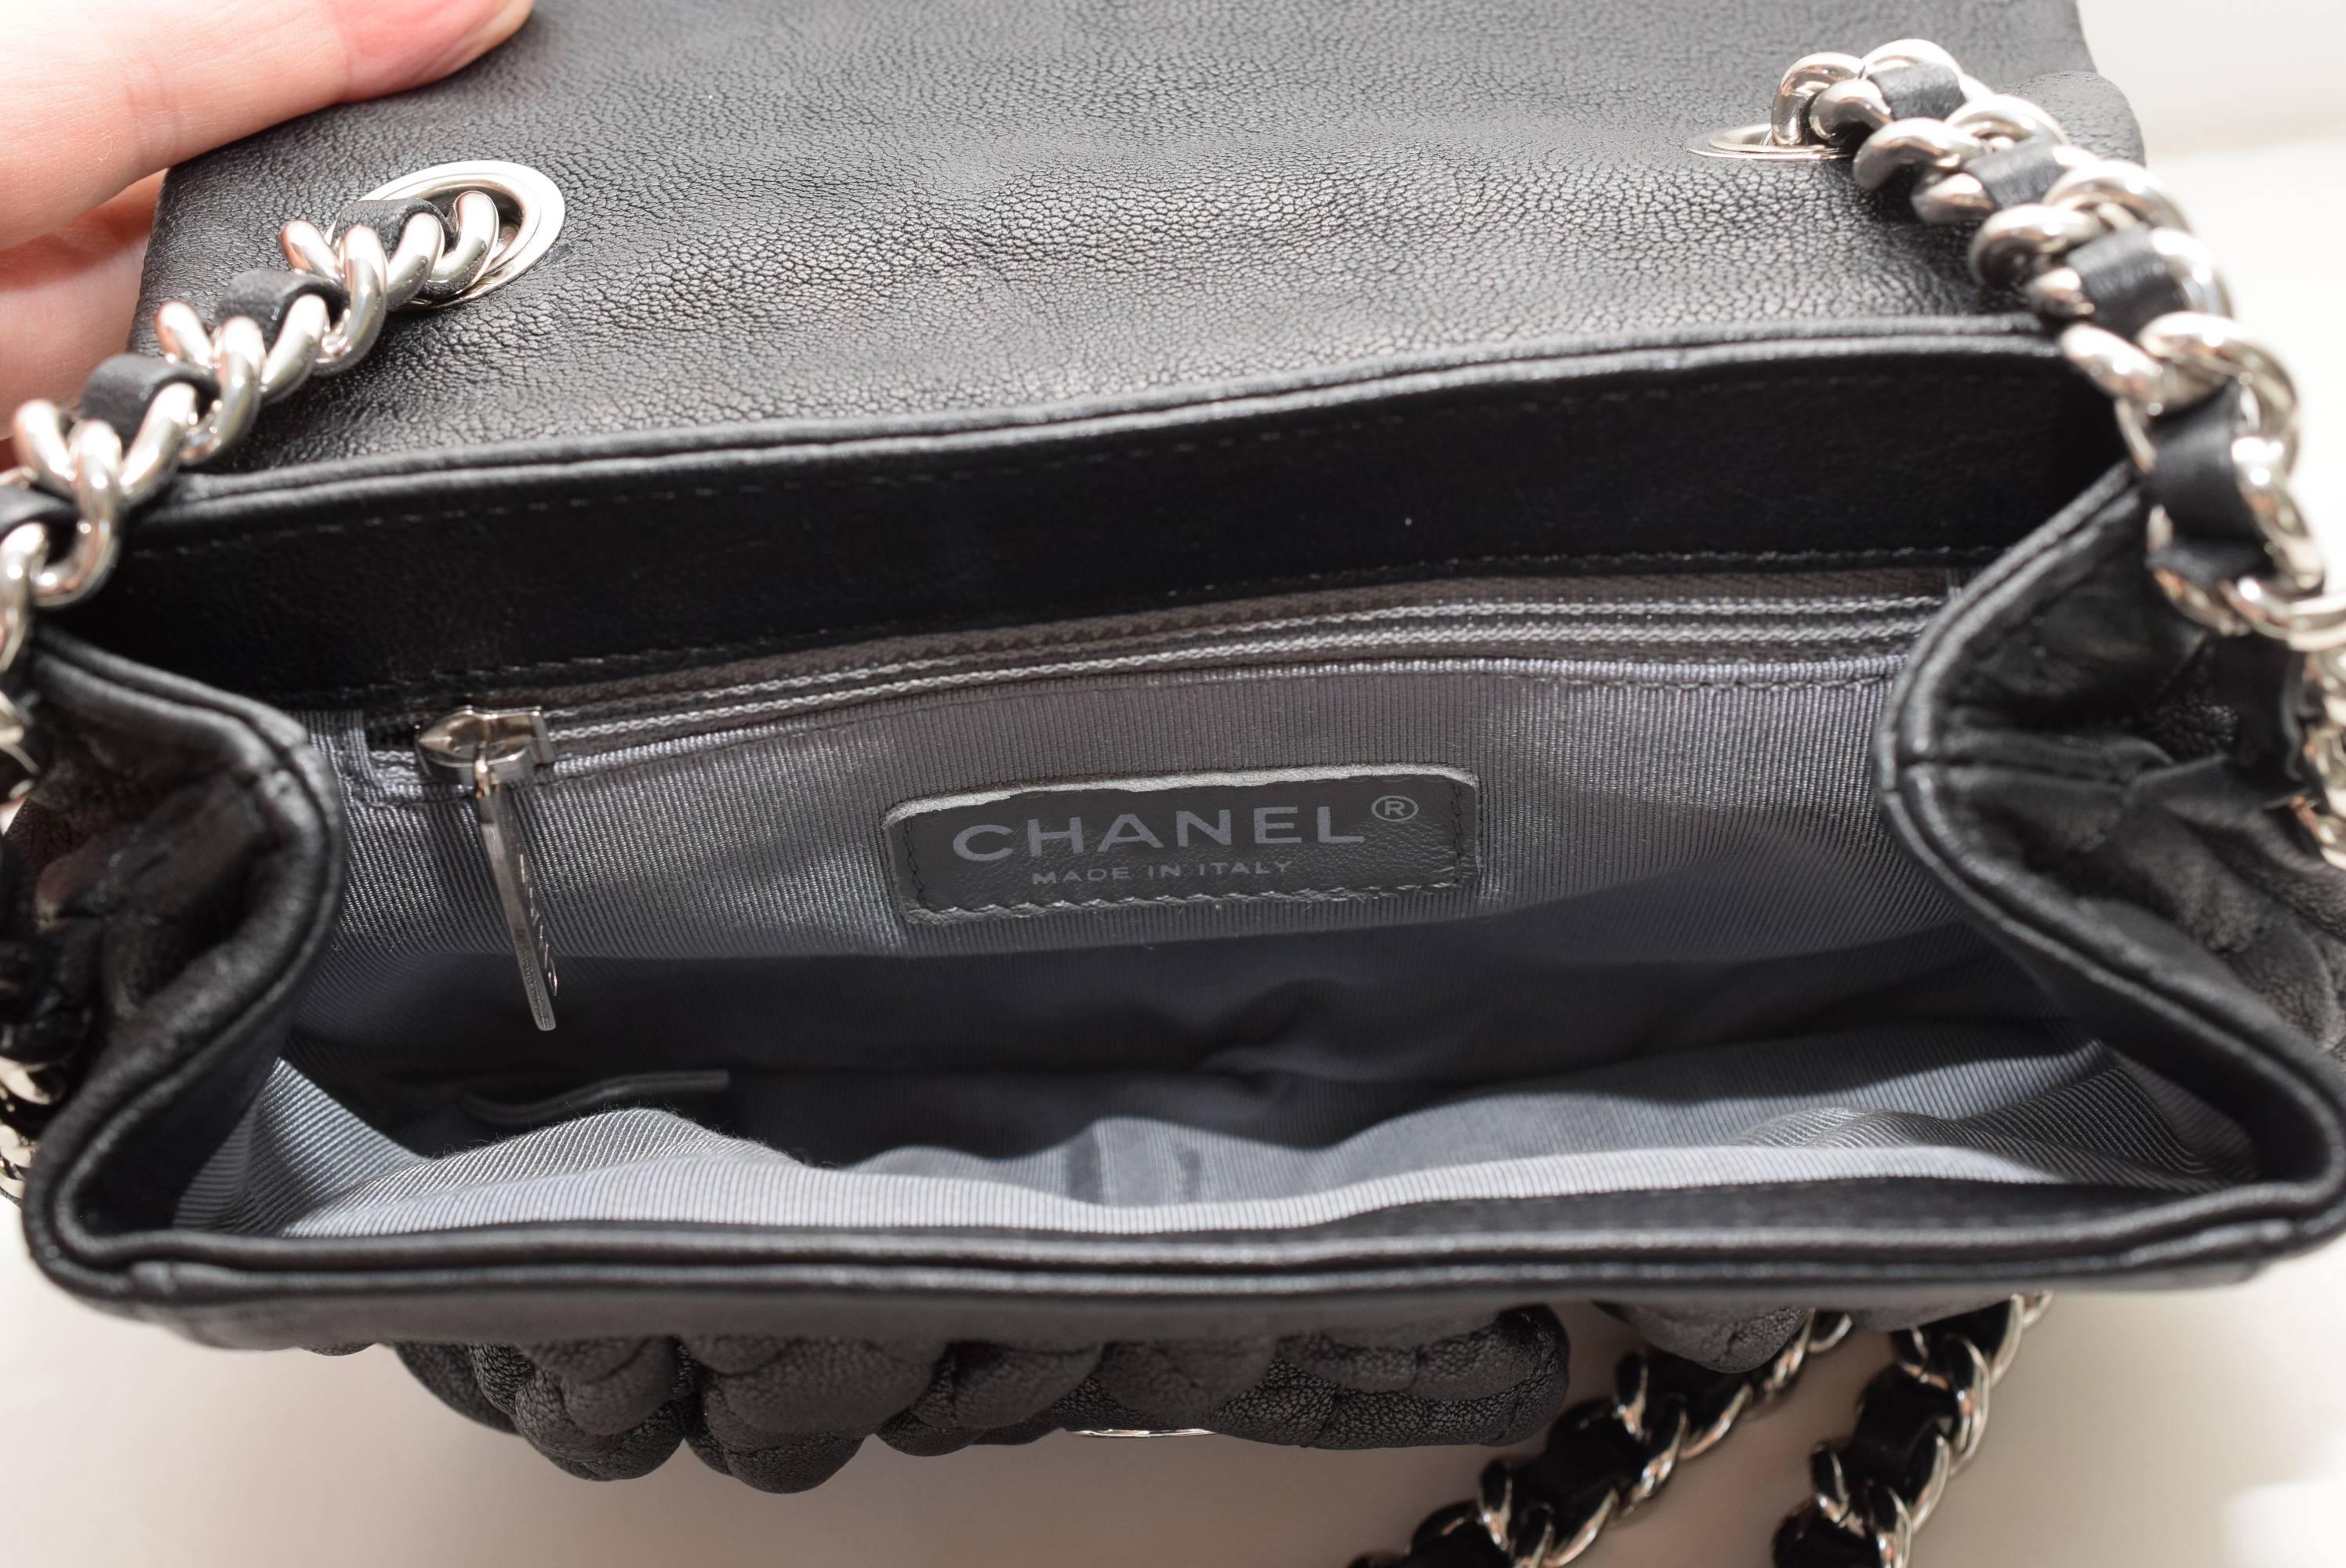 This is an authentic CHANEL Washed Lambskin Quilted small Chain Around Messenger in Black.  This chic cross body shoulder bag is crafted of luxuriously soft diamond quilted treated lambskin leather.  The bag features a chain link leather threaded